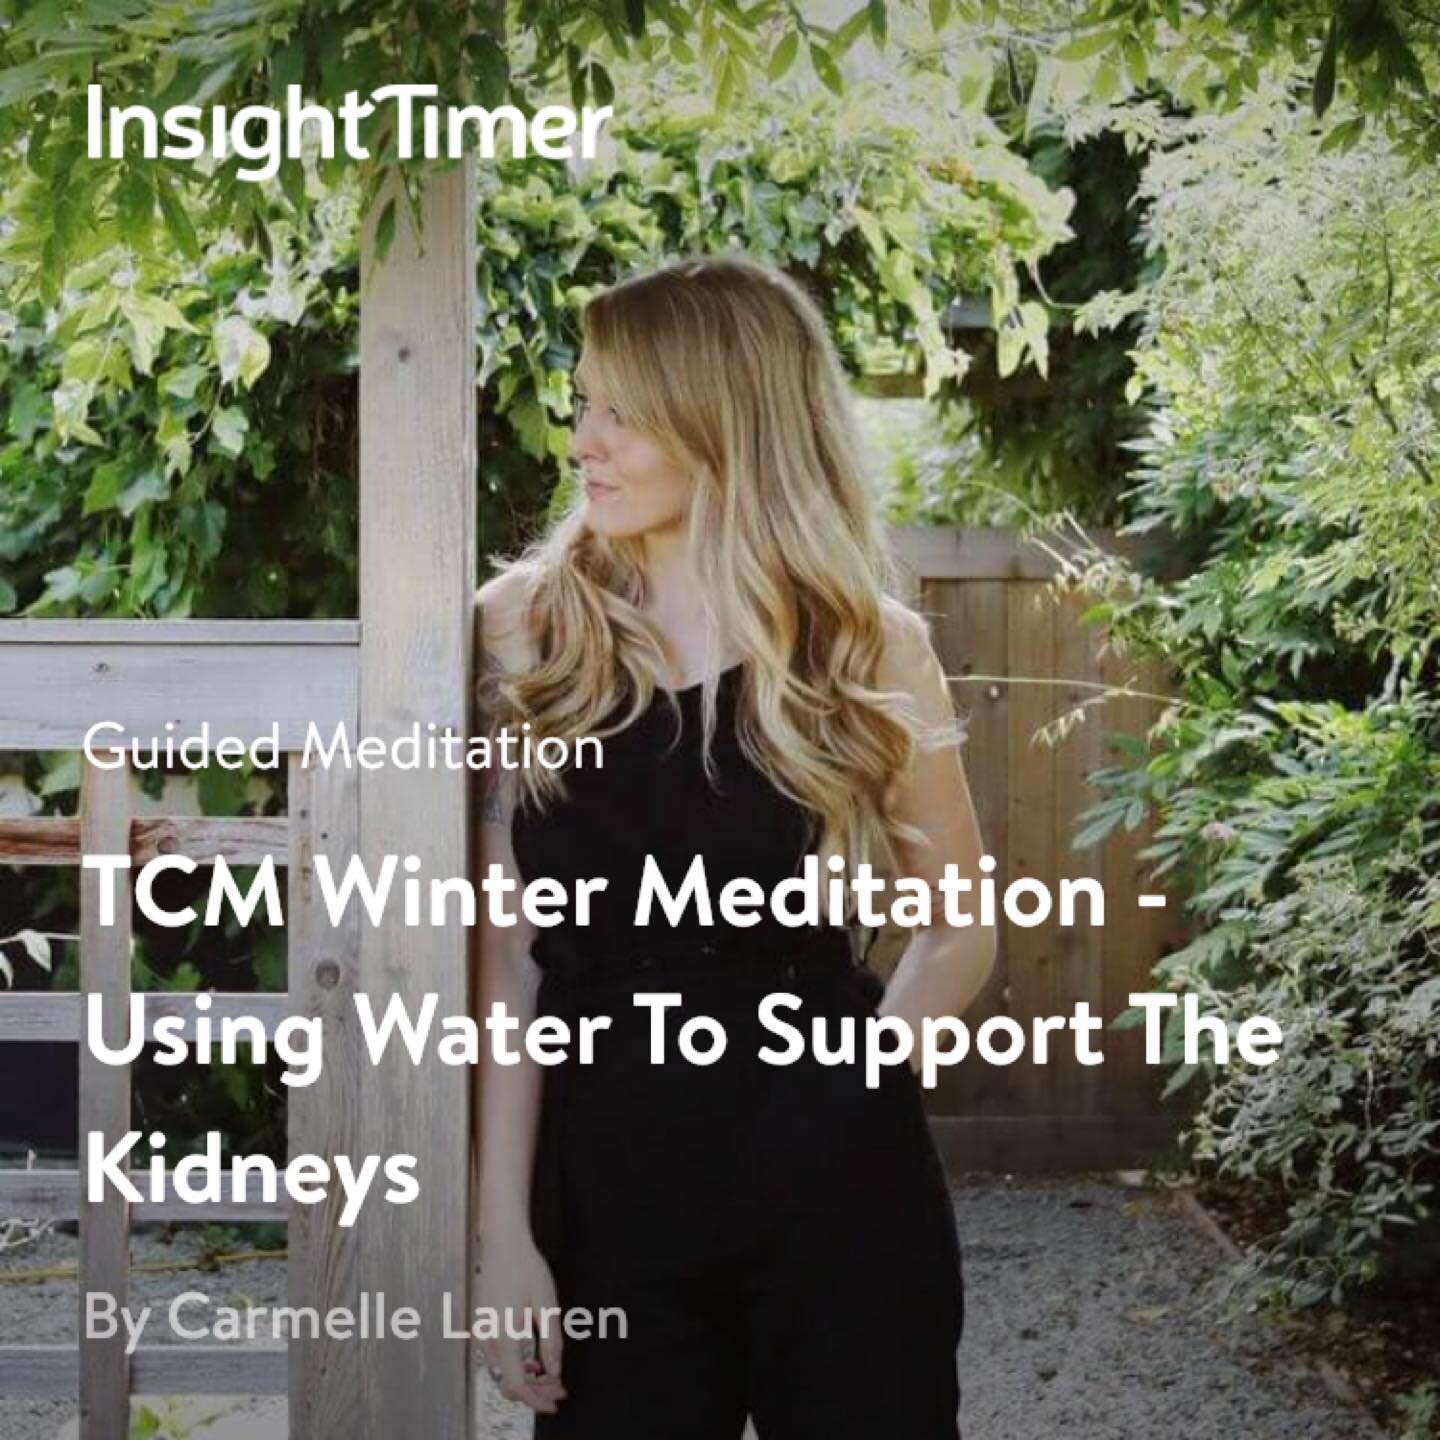 We&rsquo;ve started the last qi node of winter - Greater Cold - for the next two weeks we can rest, slow down and support the kidneys. Link in stories or on the App.